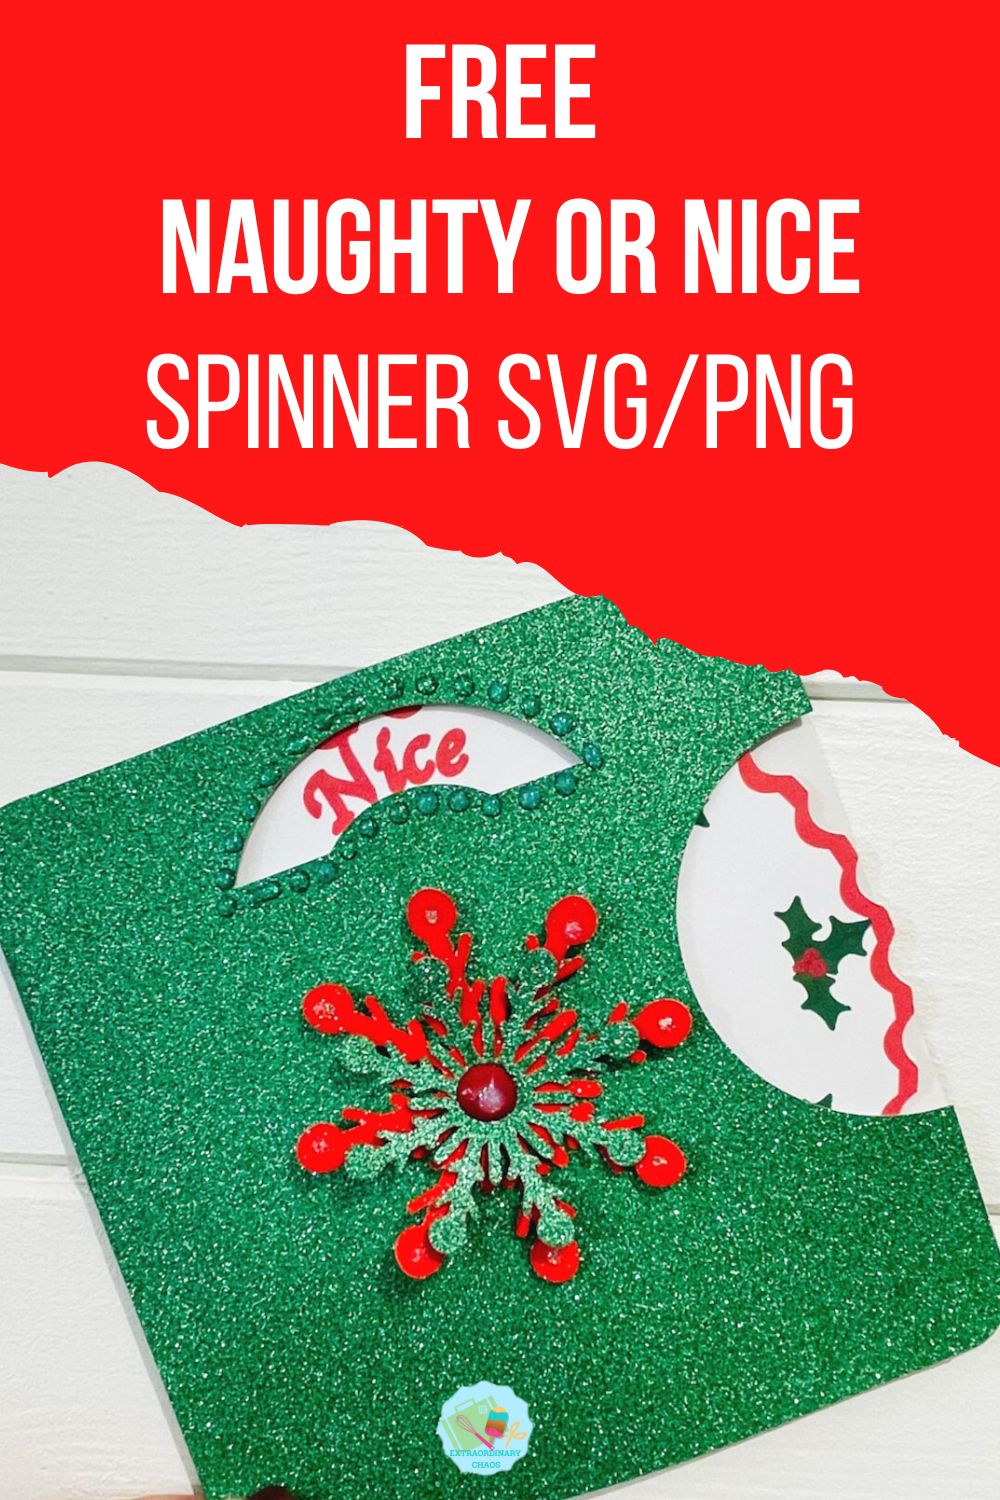 Free Naughty Or Nice Spinner SVGPNG